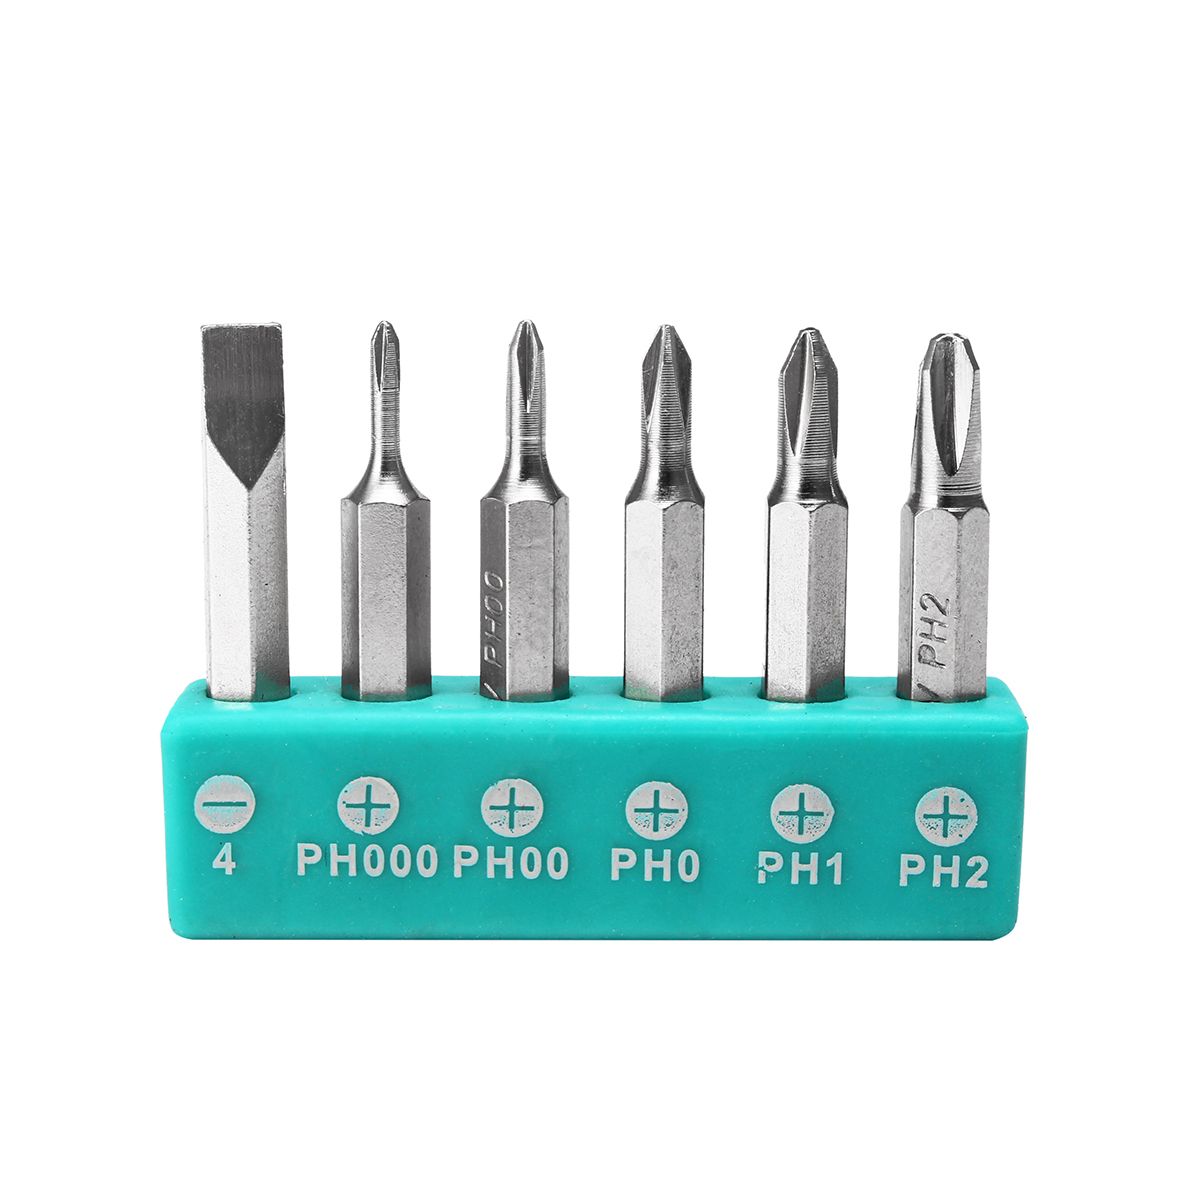 58-In-1-Multifunction-Precision-Screwdriver-Kit-Magnetic-with-54-Bits-for-Phone-Watch-Sun-Glassess-1339468